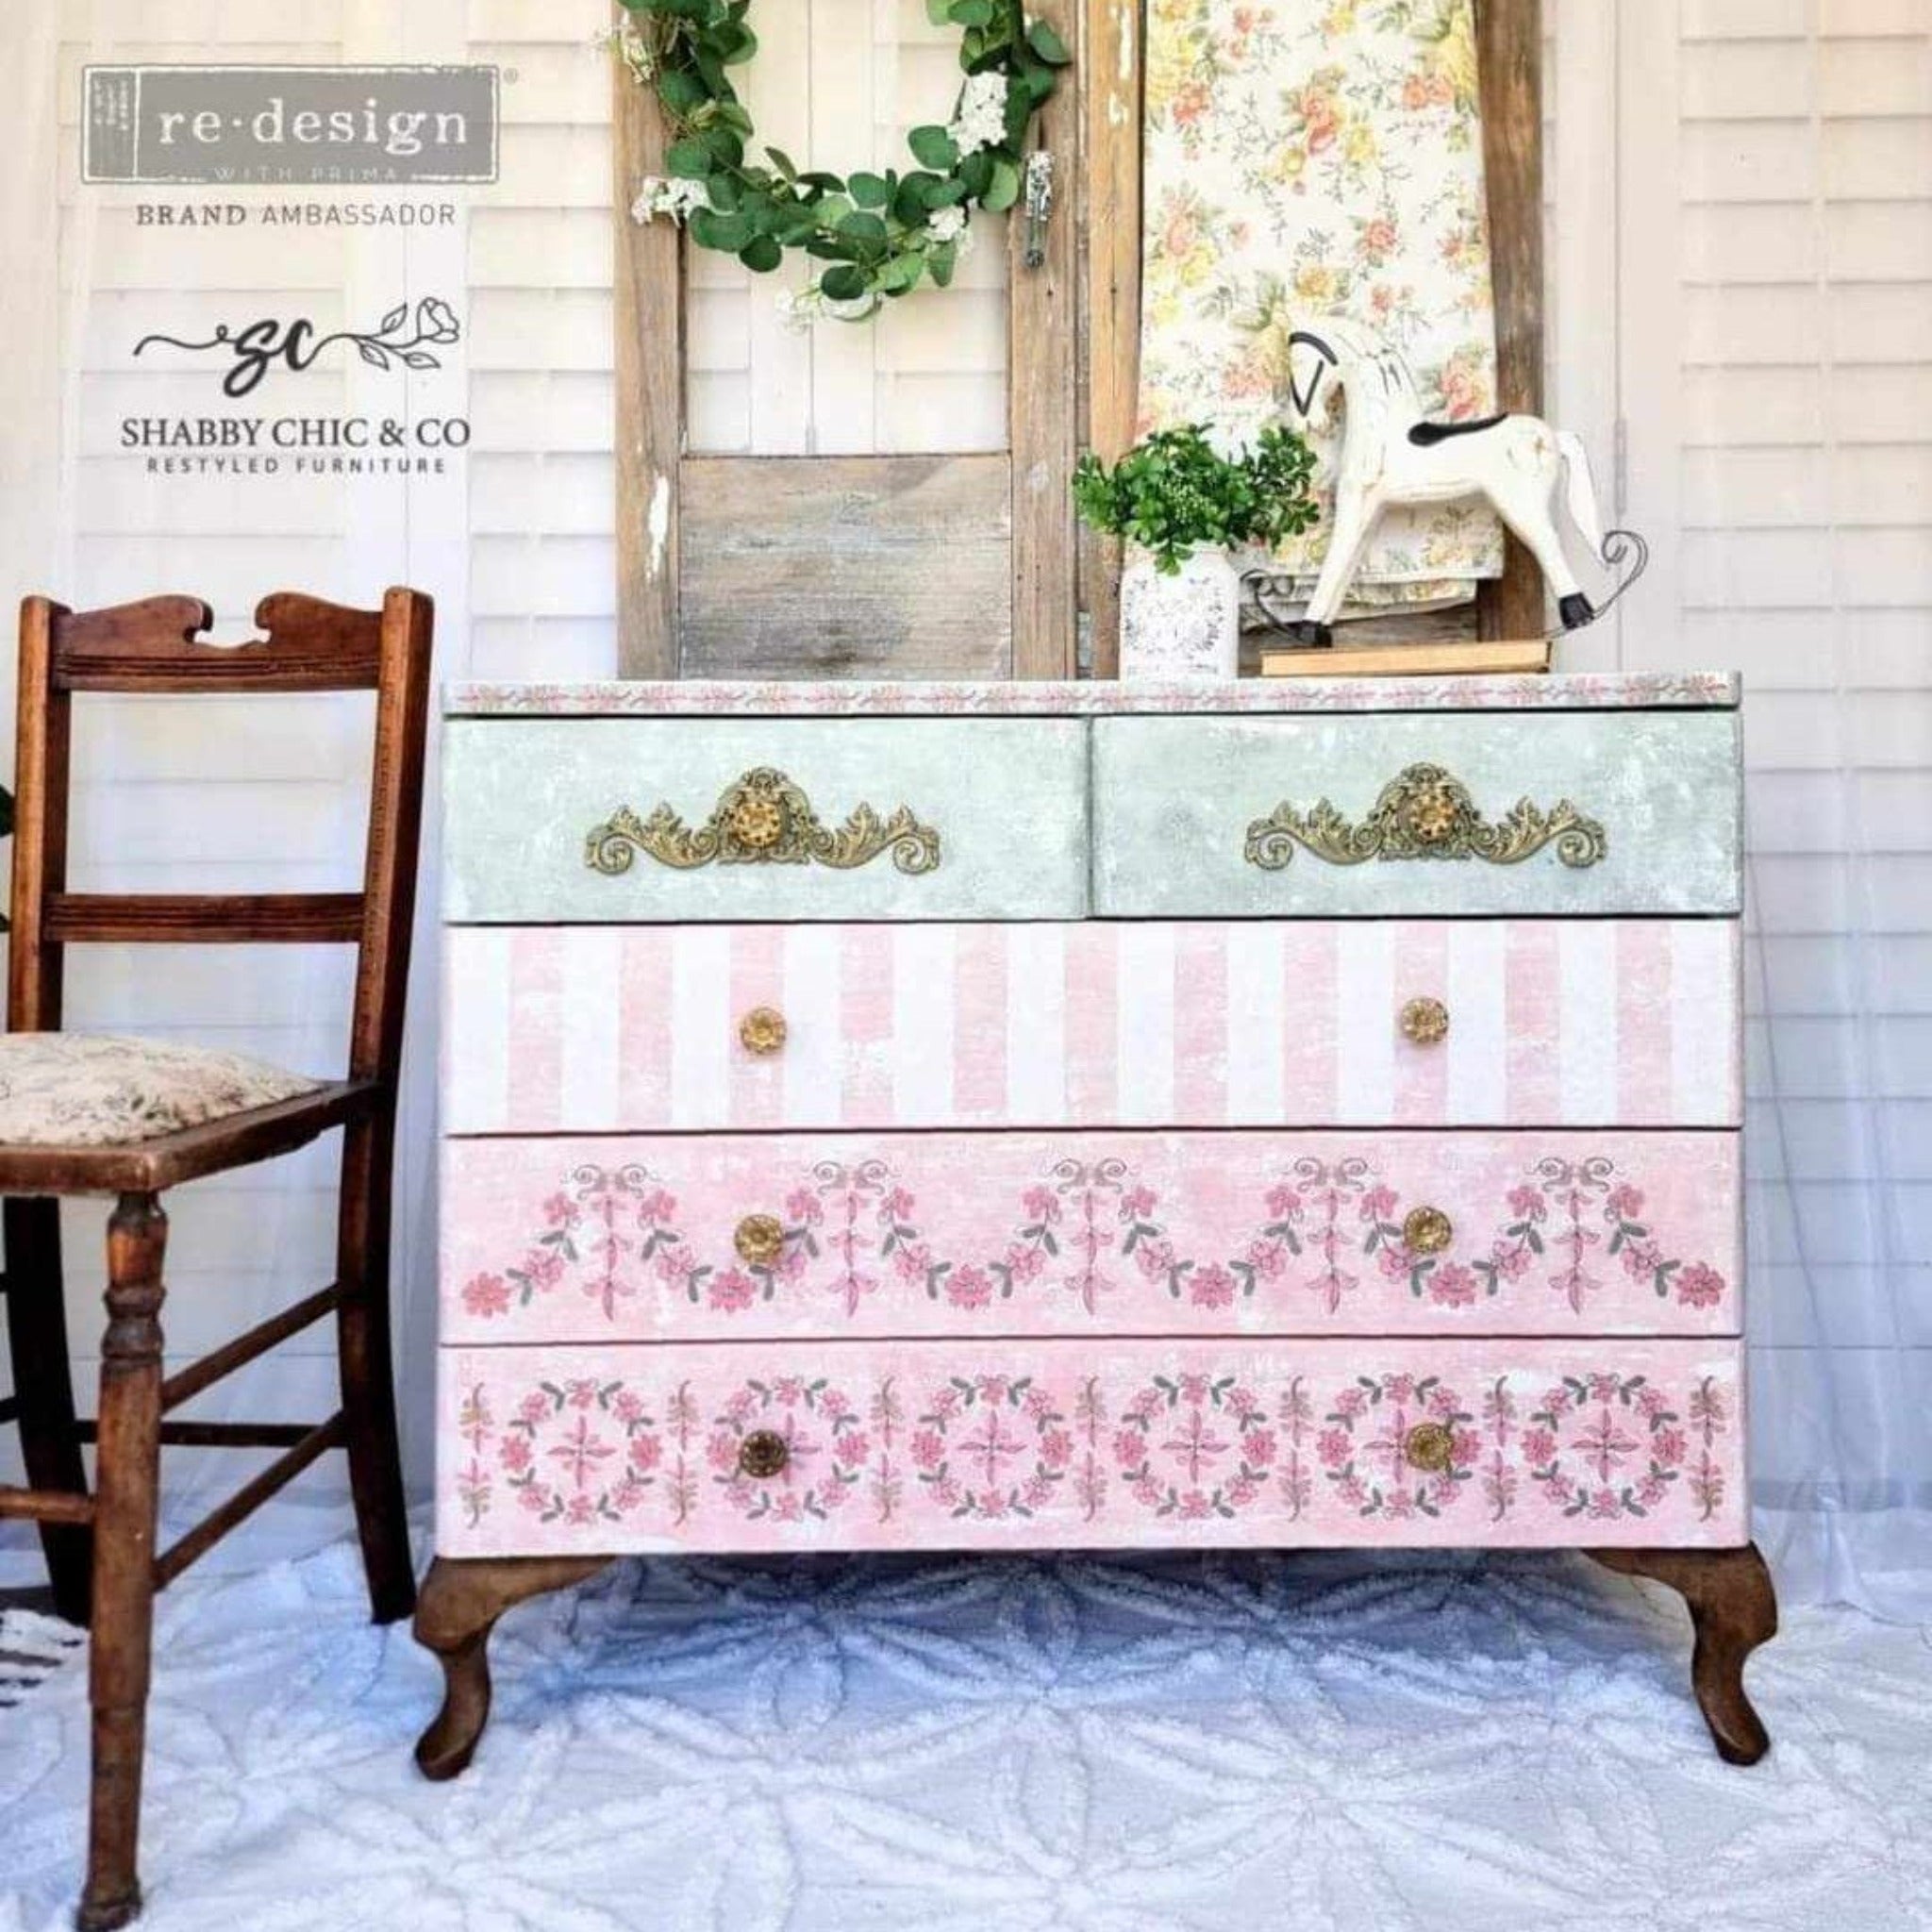 A vintage 5 drawer dresser refurbished by Shabby Chic & Co. features different pastel designs on the drawers. The top 2 drawers feature gold colored ReDesign with Prima's Kacha Lavish Swirls silicone mould castings around the drawer pulls.